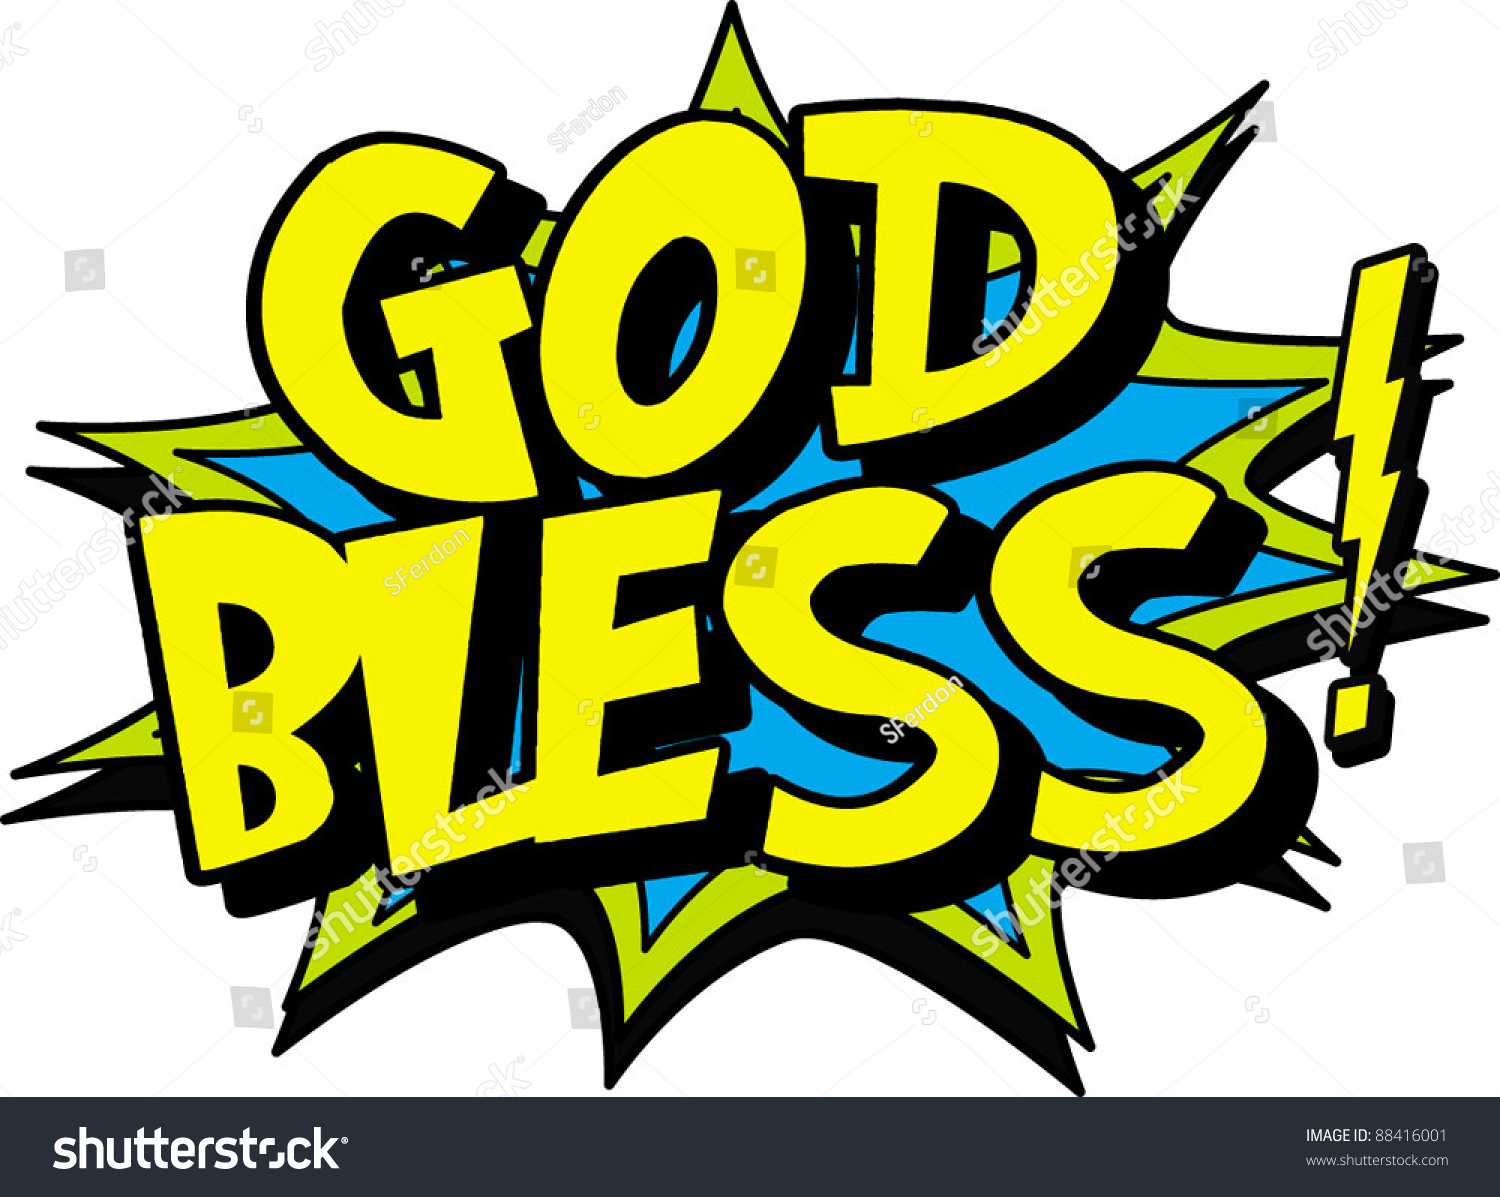 god bless you clipart - photo #23